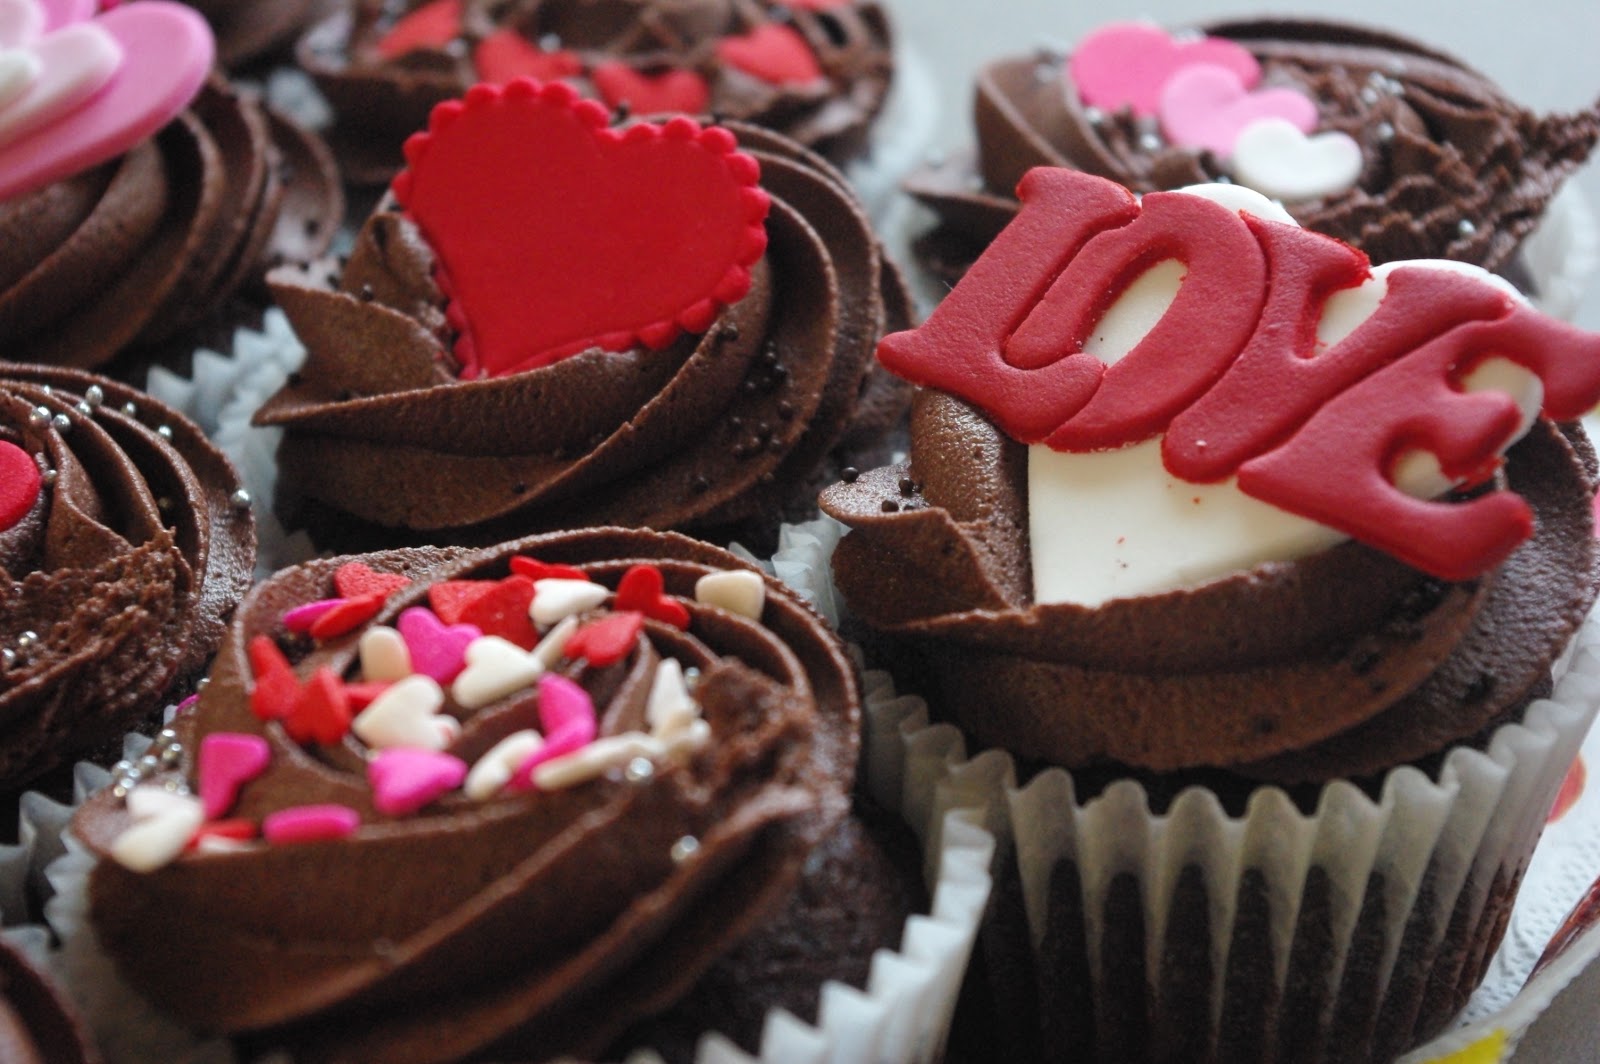 6. Latest Valentine Day Chocolate Hd Wallpaper And Picture 2014